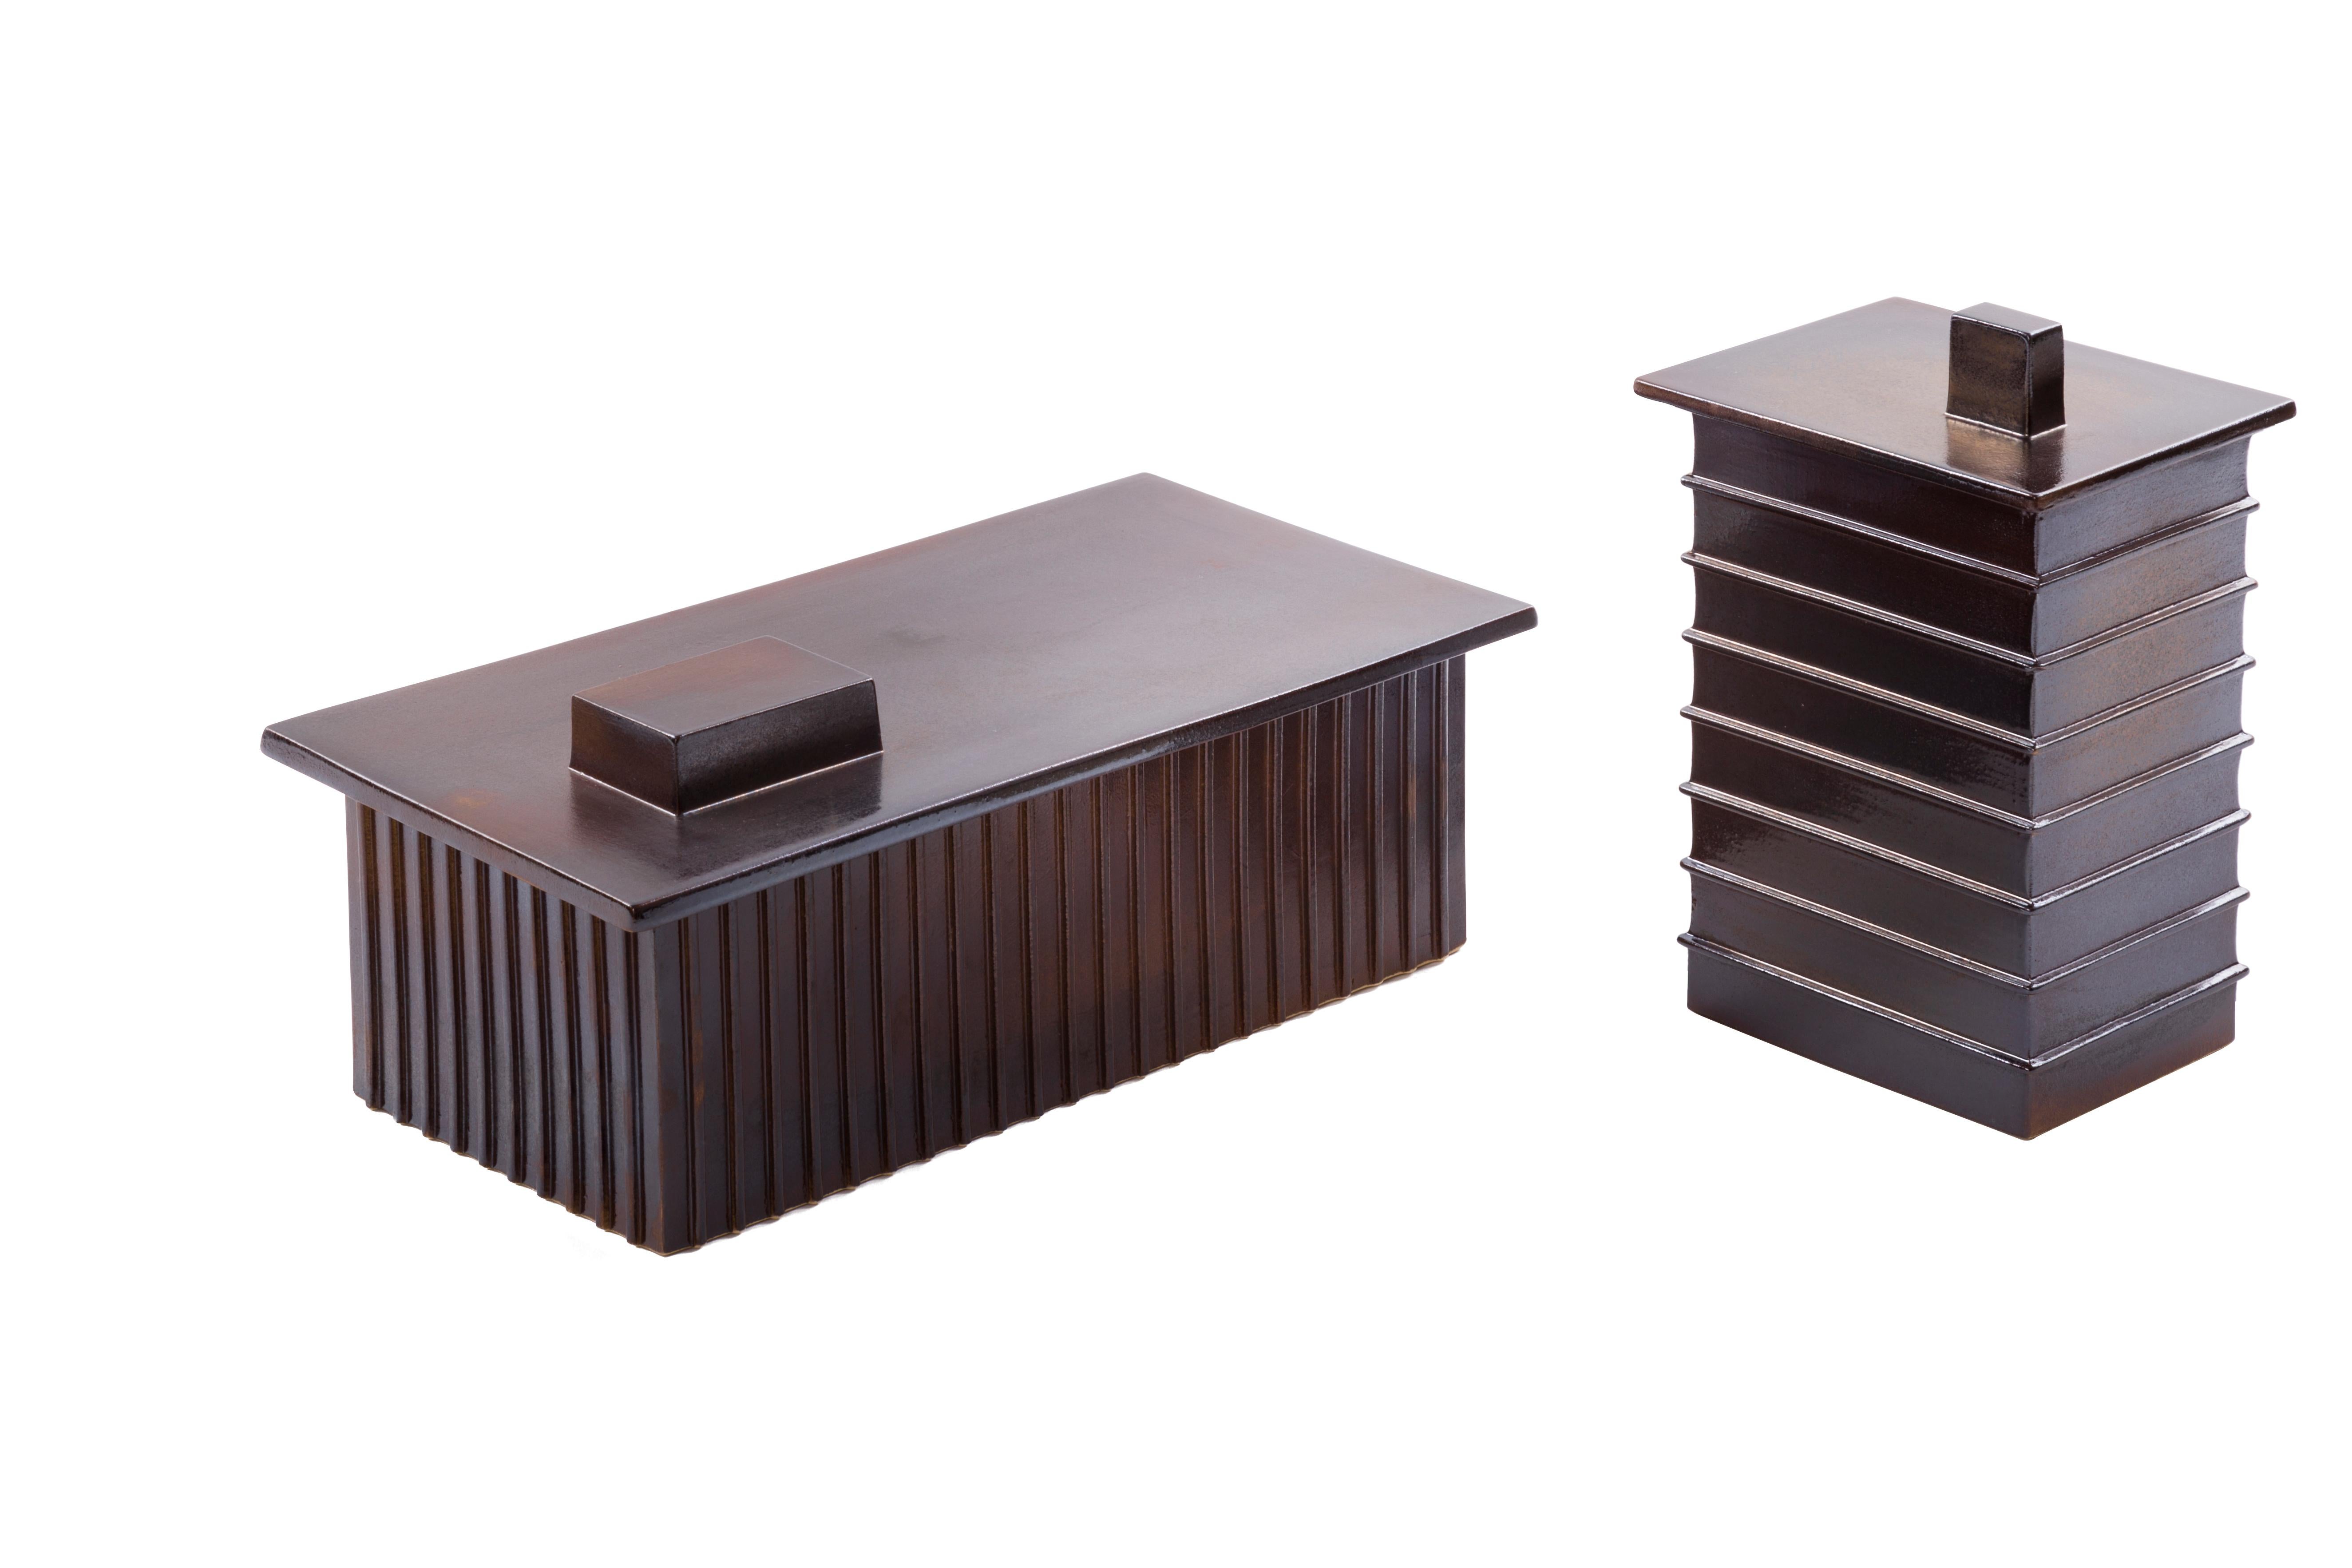 Set of 2 building boxes by Pulpo
Dimensions: D32.5 x W17 x H13 cm / D14.5 × W11.5 × H23.5 cm
Materials: Ceramic

Also available in different colours. 

This building boxes bring to mind the Industrial areas so familiar within our urban